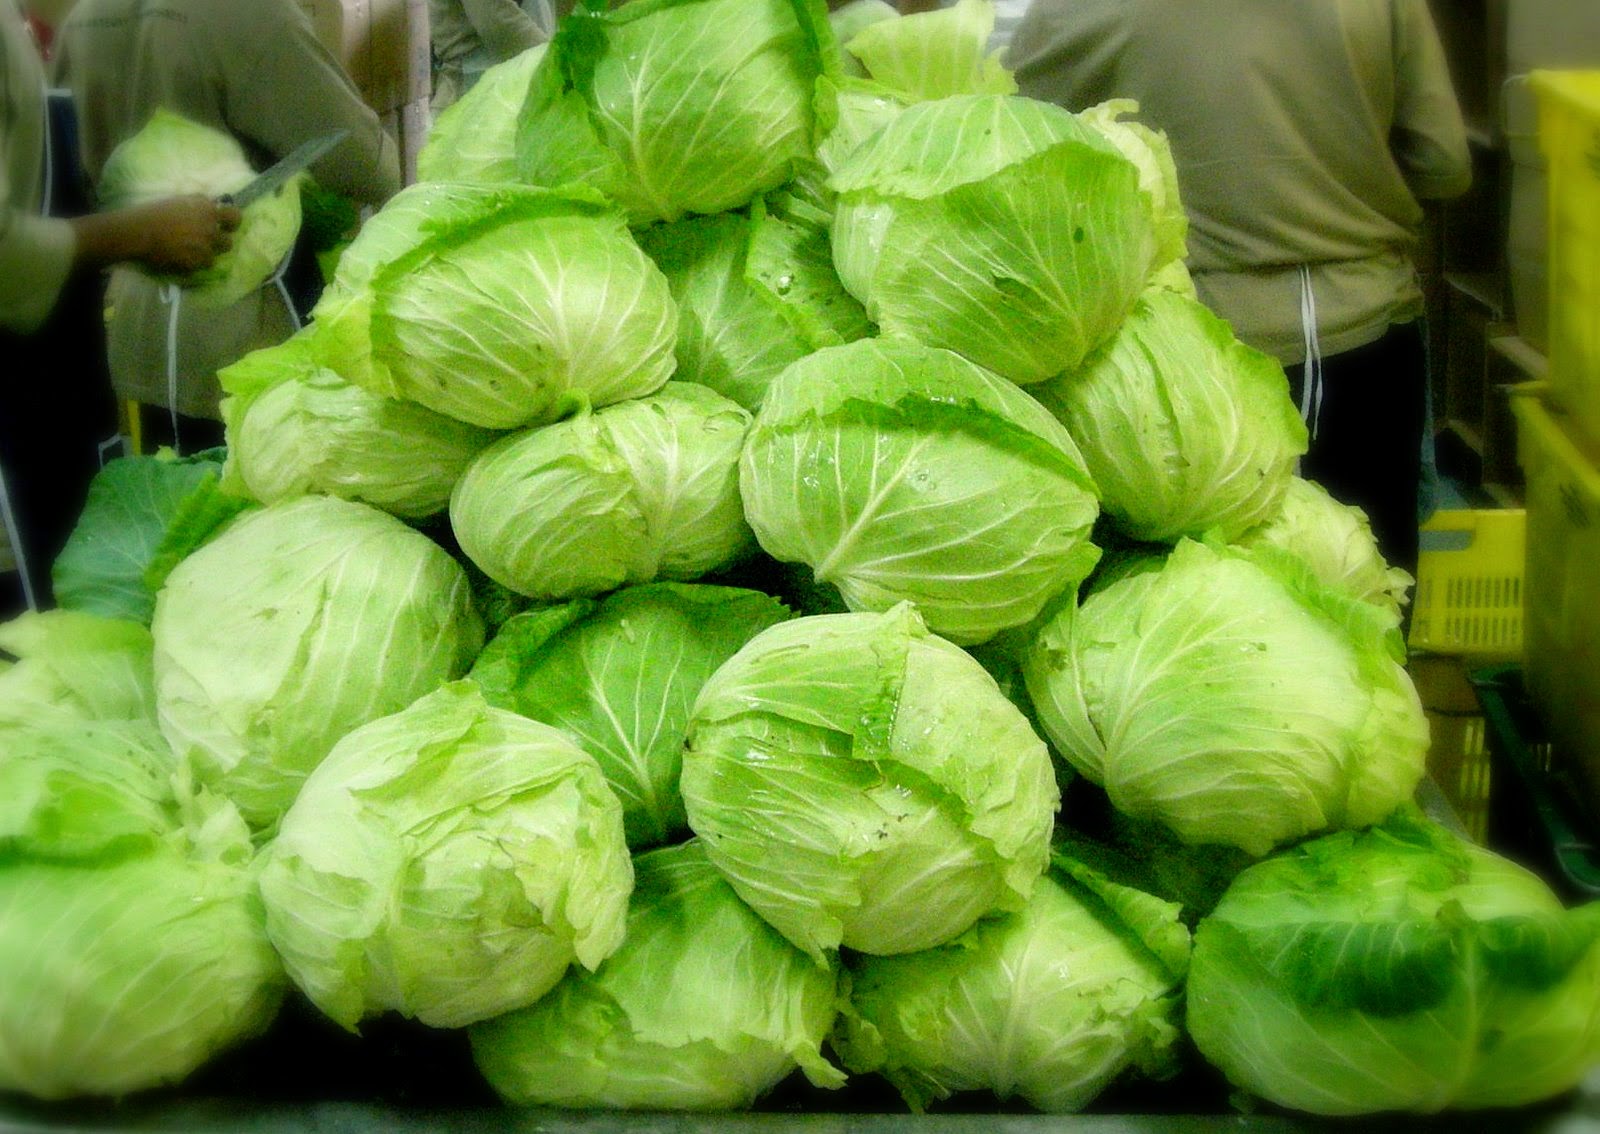 Benefits of cabbage for your health